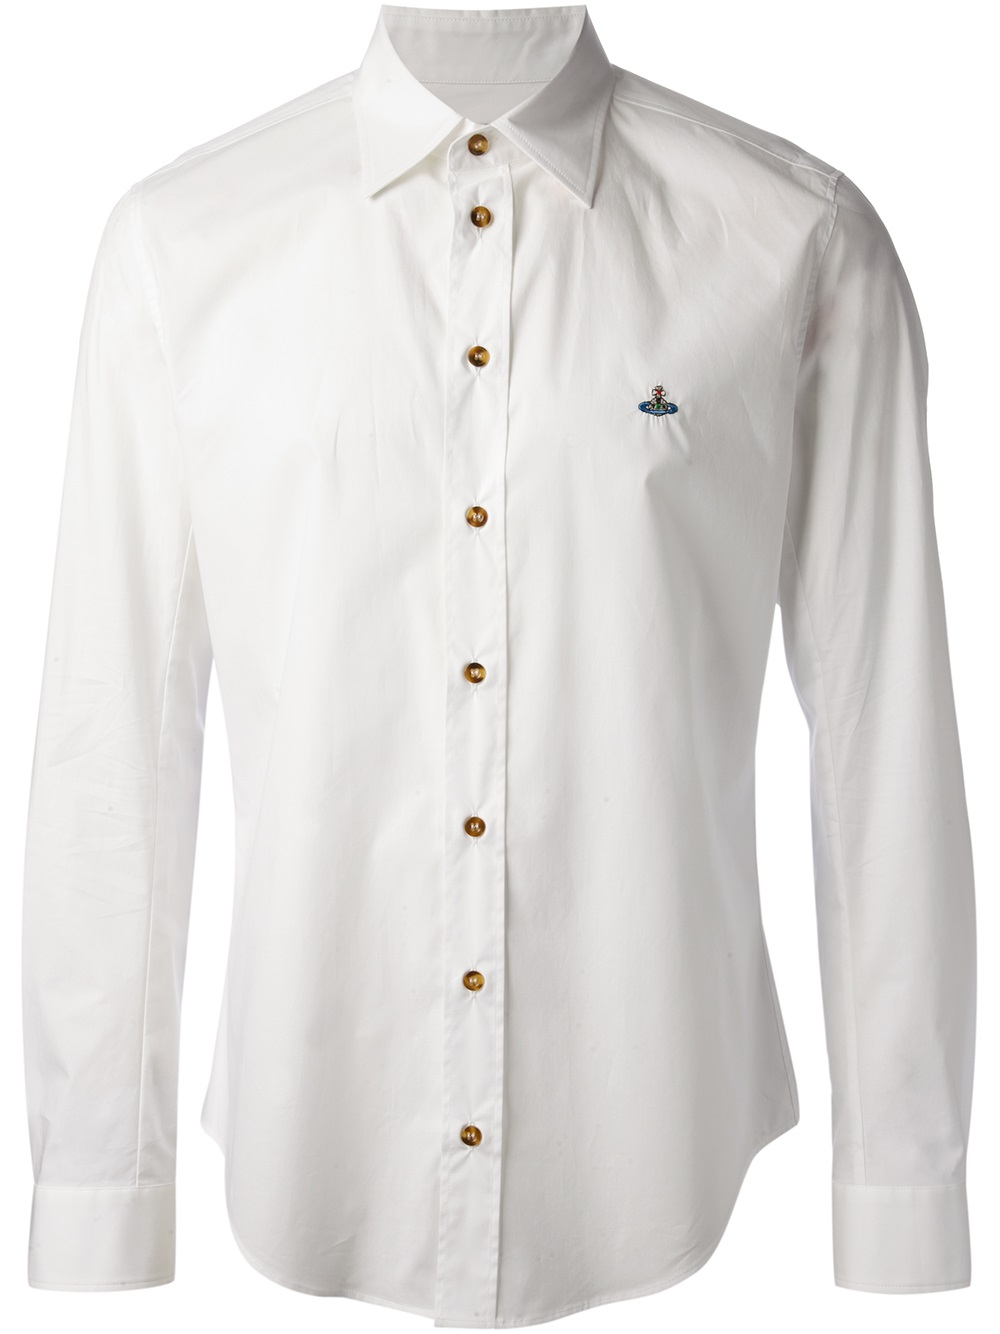 Lyst - Vivienne Westwood Collared Shirt in White for Men